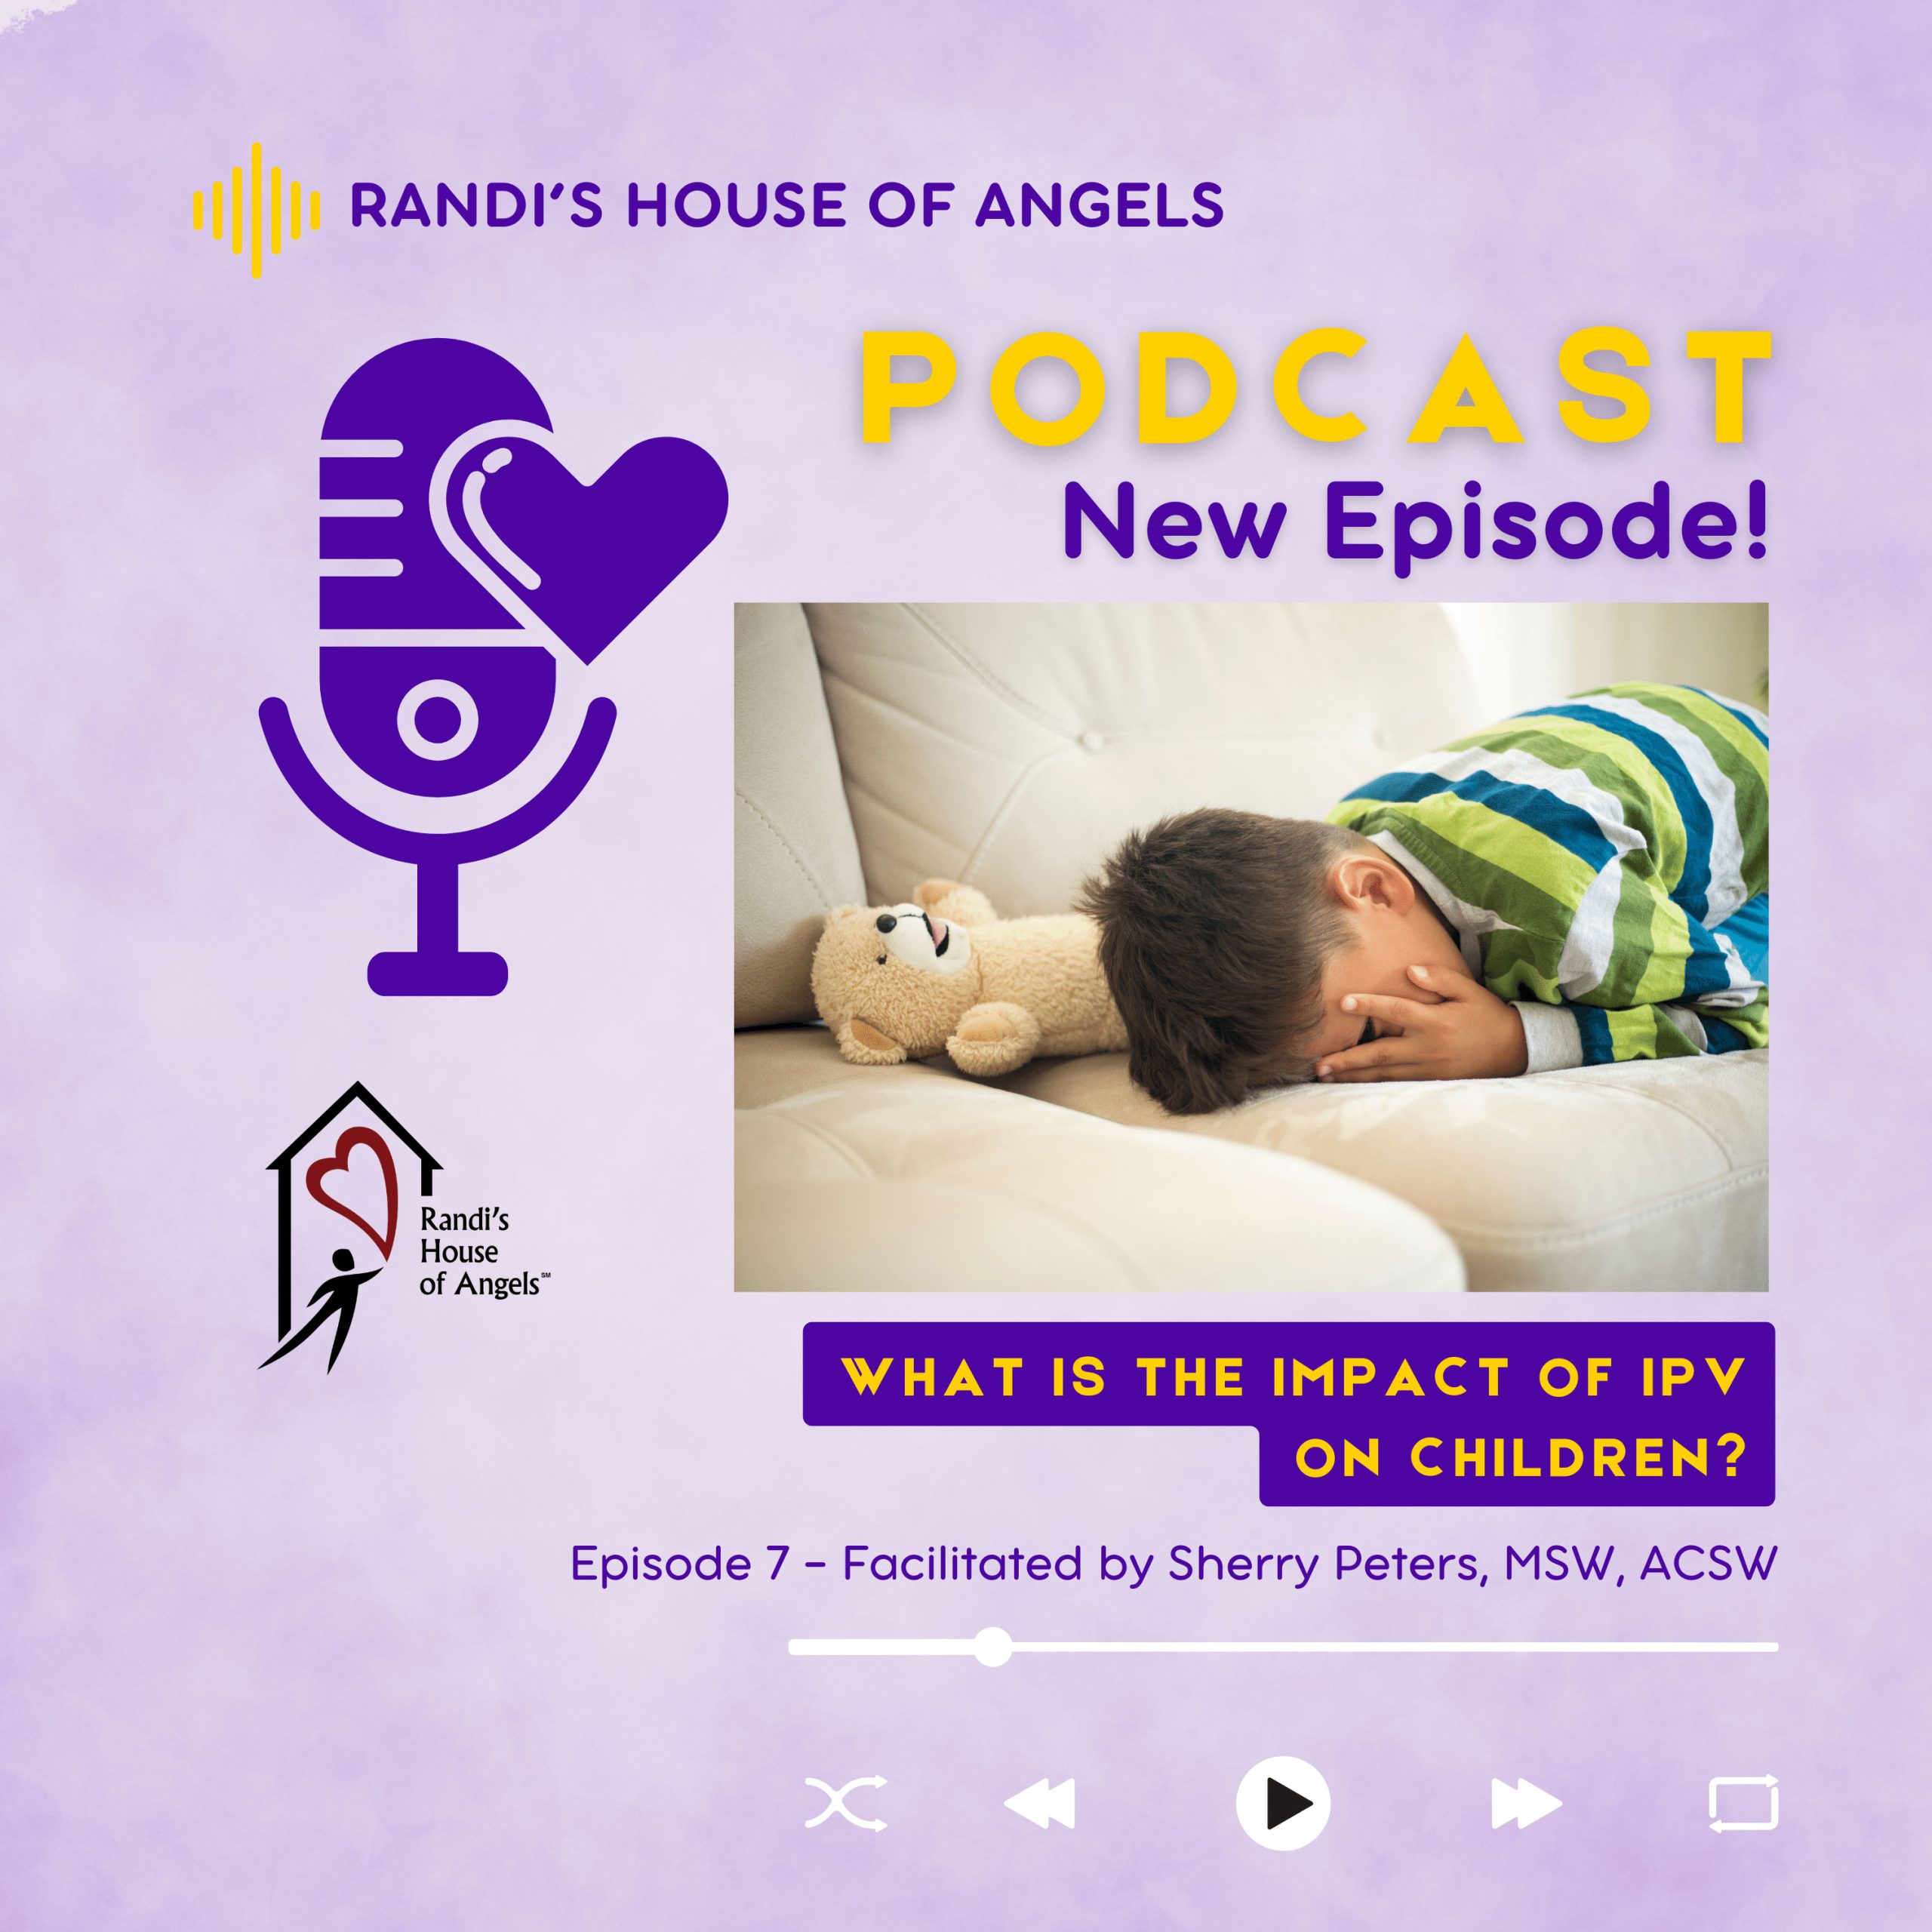 Randi's House of Angels (RHOA) Podcast Episode 7 - What is the impact of IPV on children? - cover art